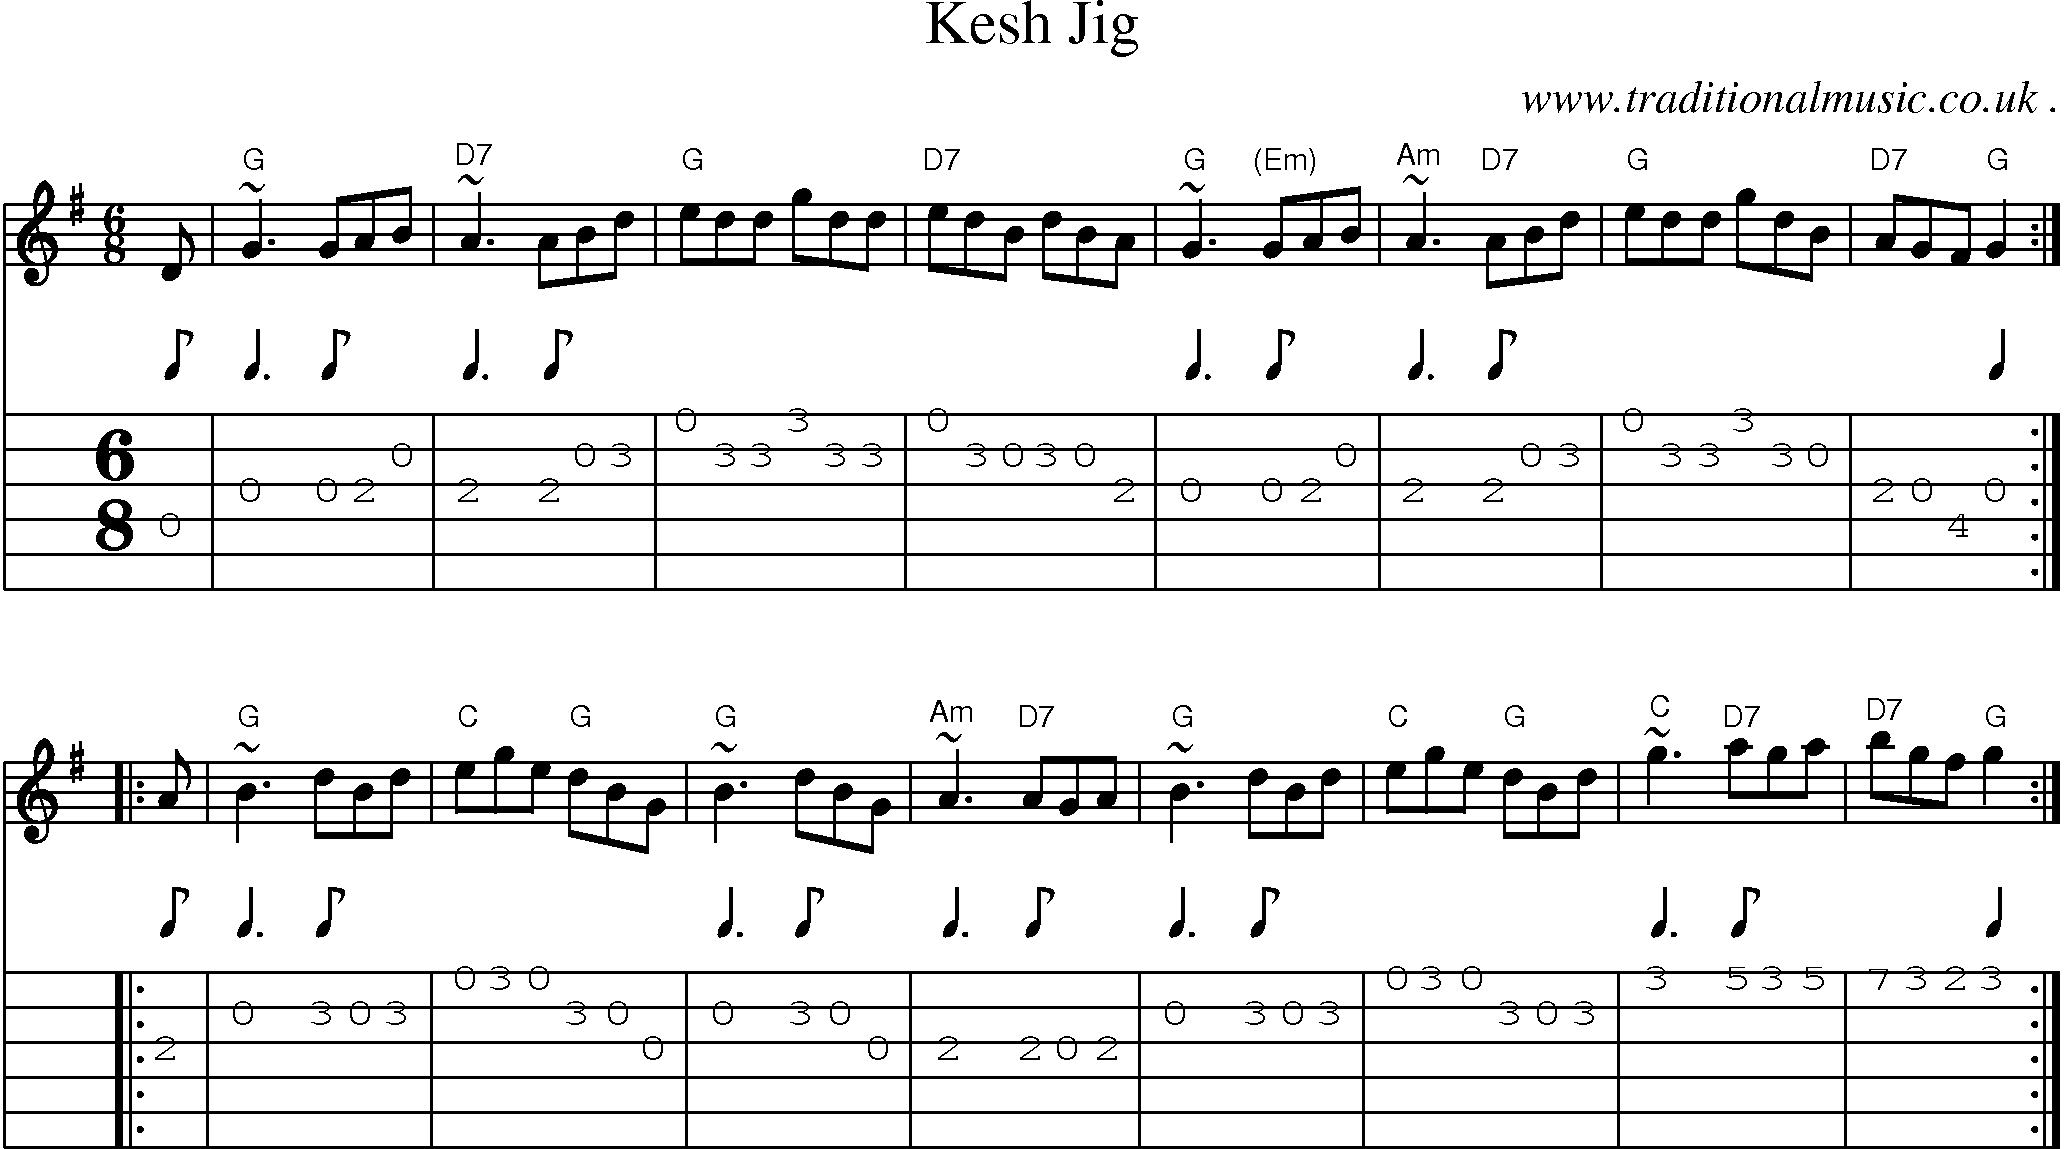 Sheet-music  score, Chords and Guitar Tabs for Kesh Jig